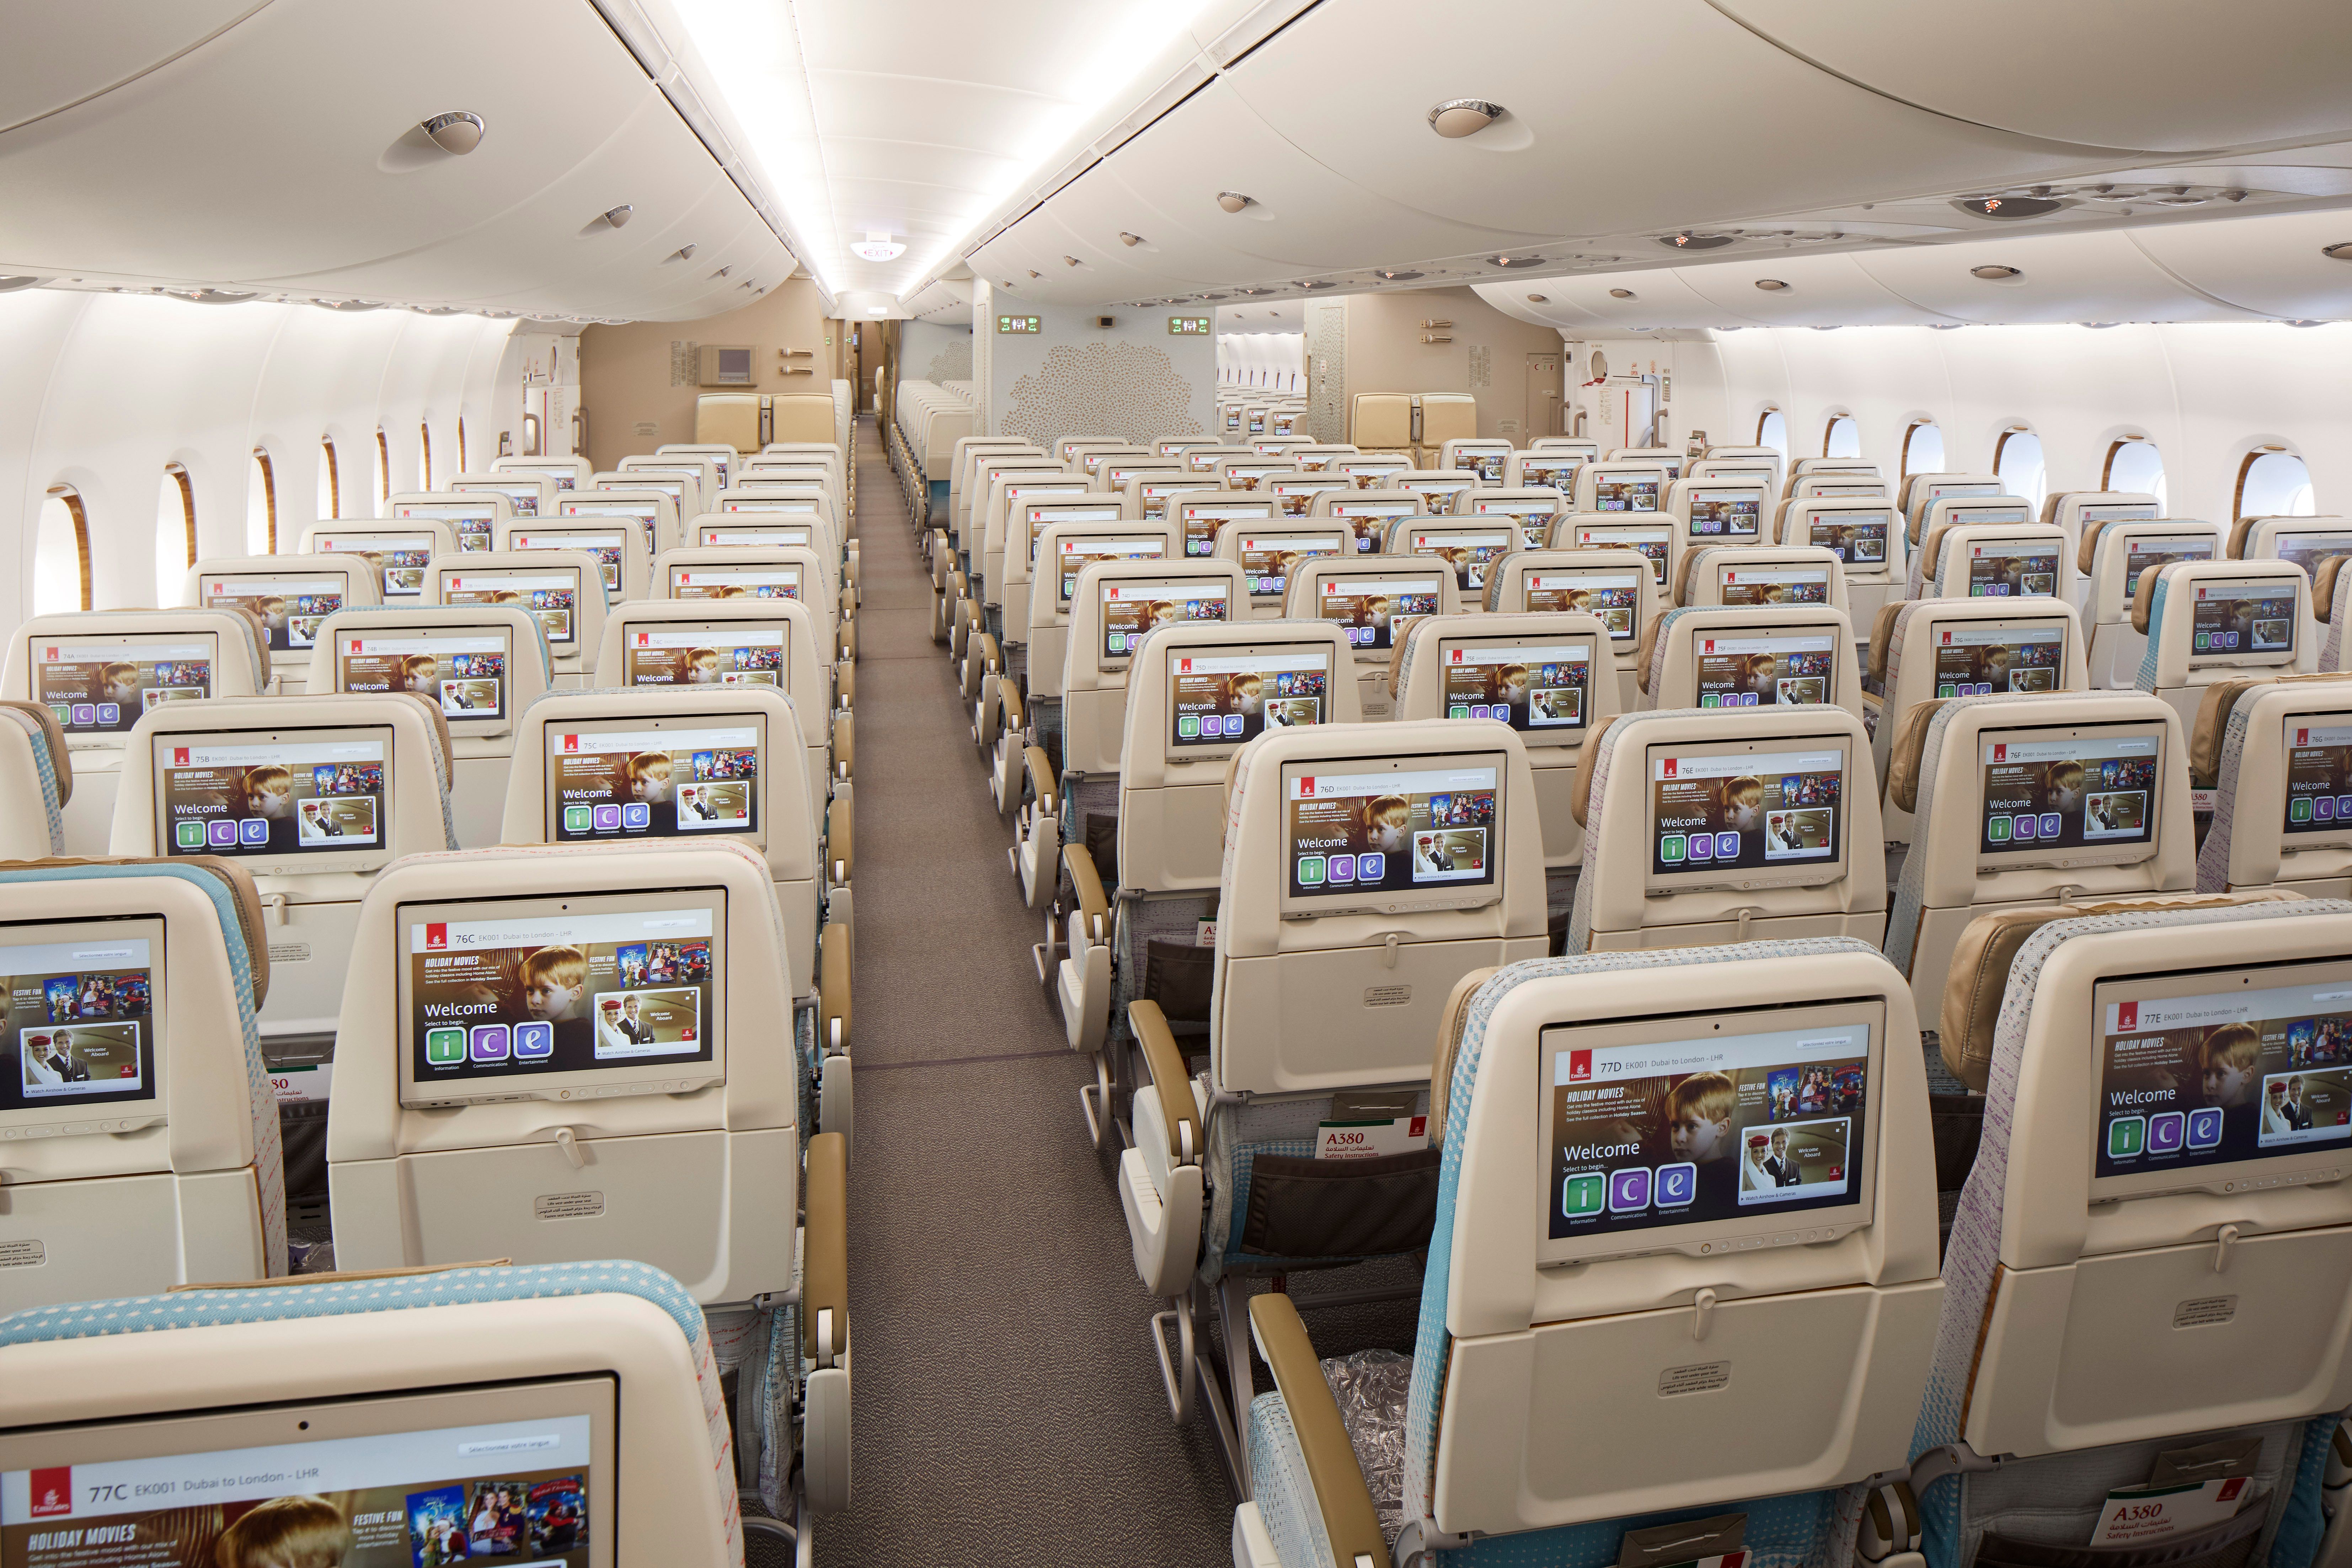 Inside the Emirates A380 economy cabin.